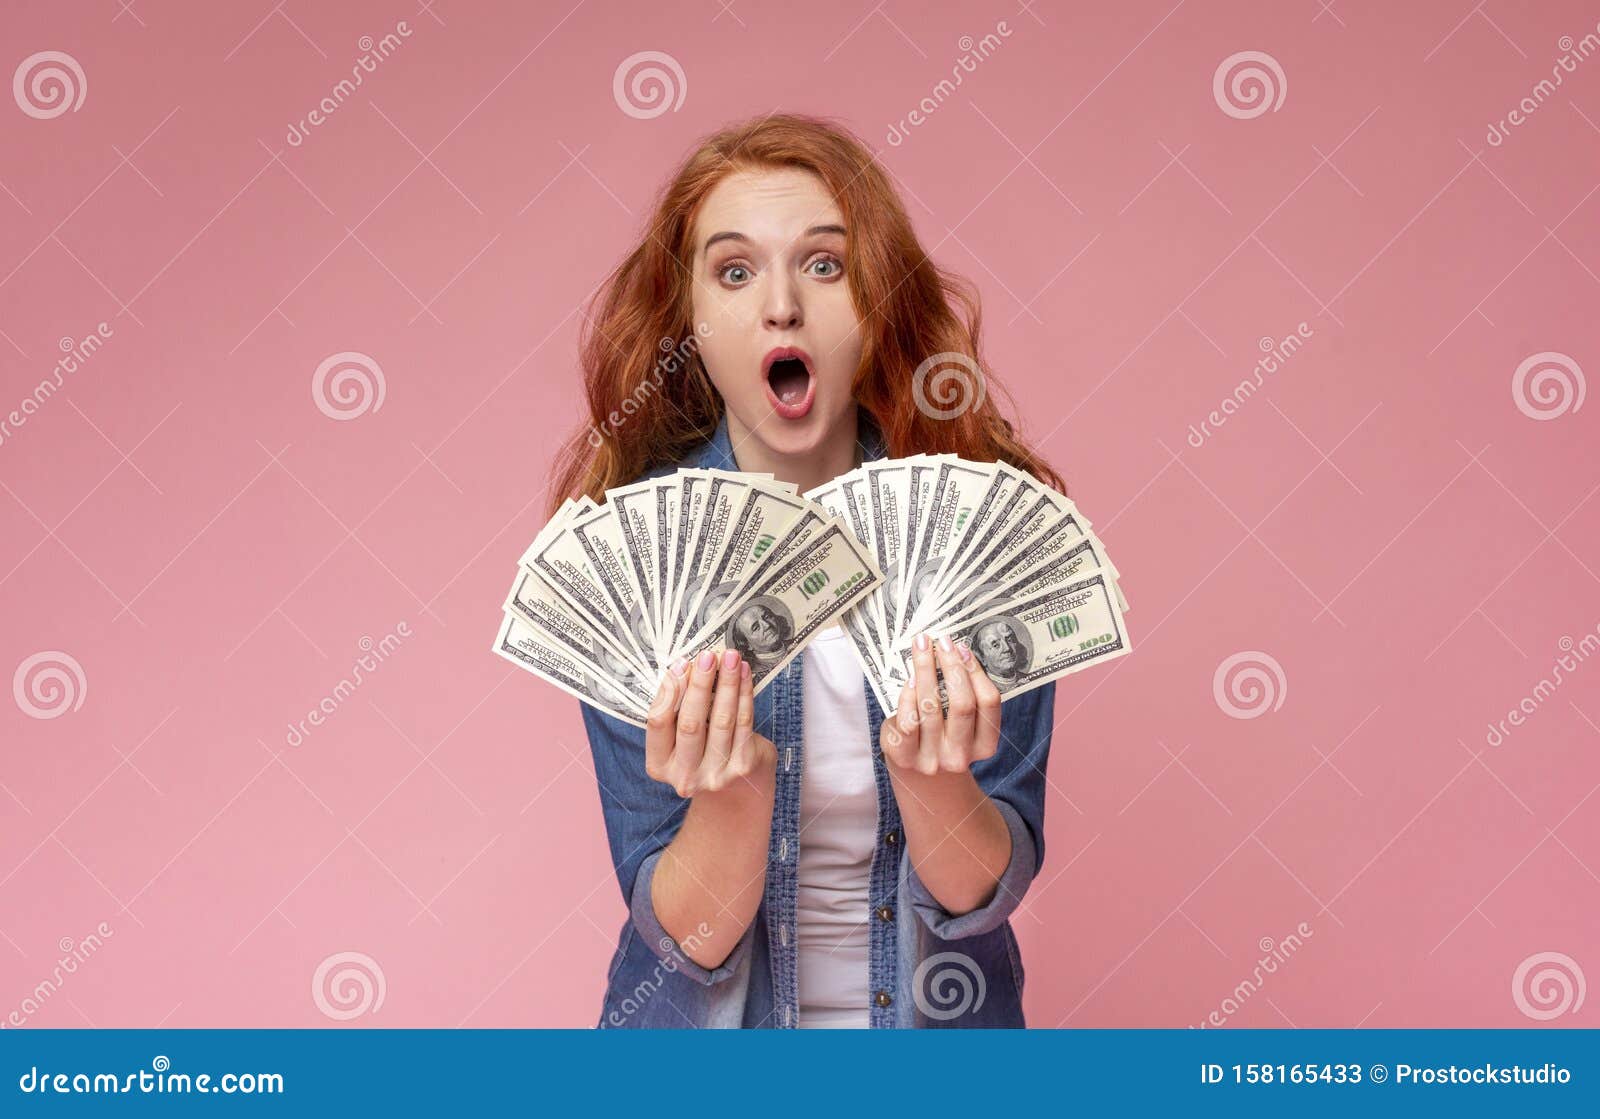 Shocked Redhead Girl Holding Lots of Money and Shouting Stock Image ...